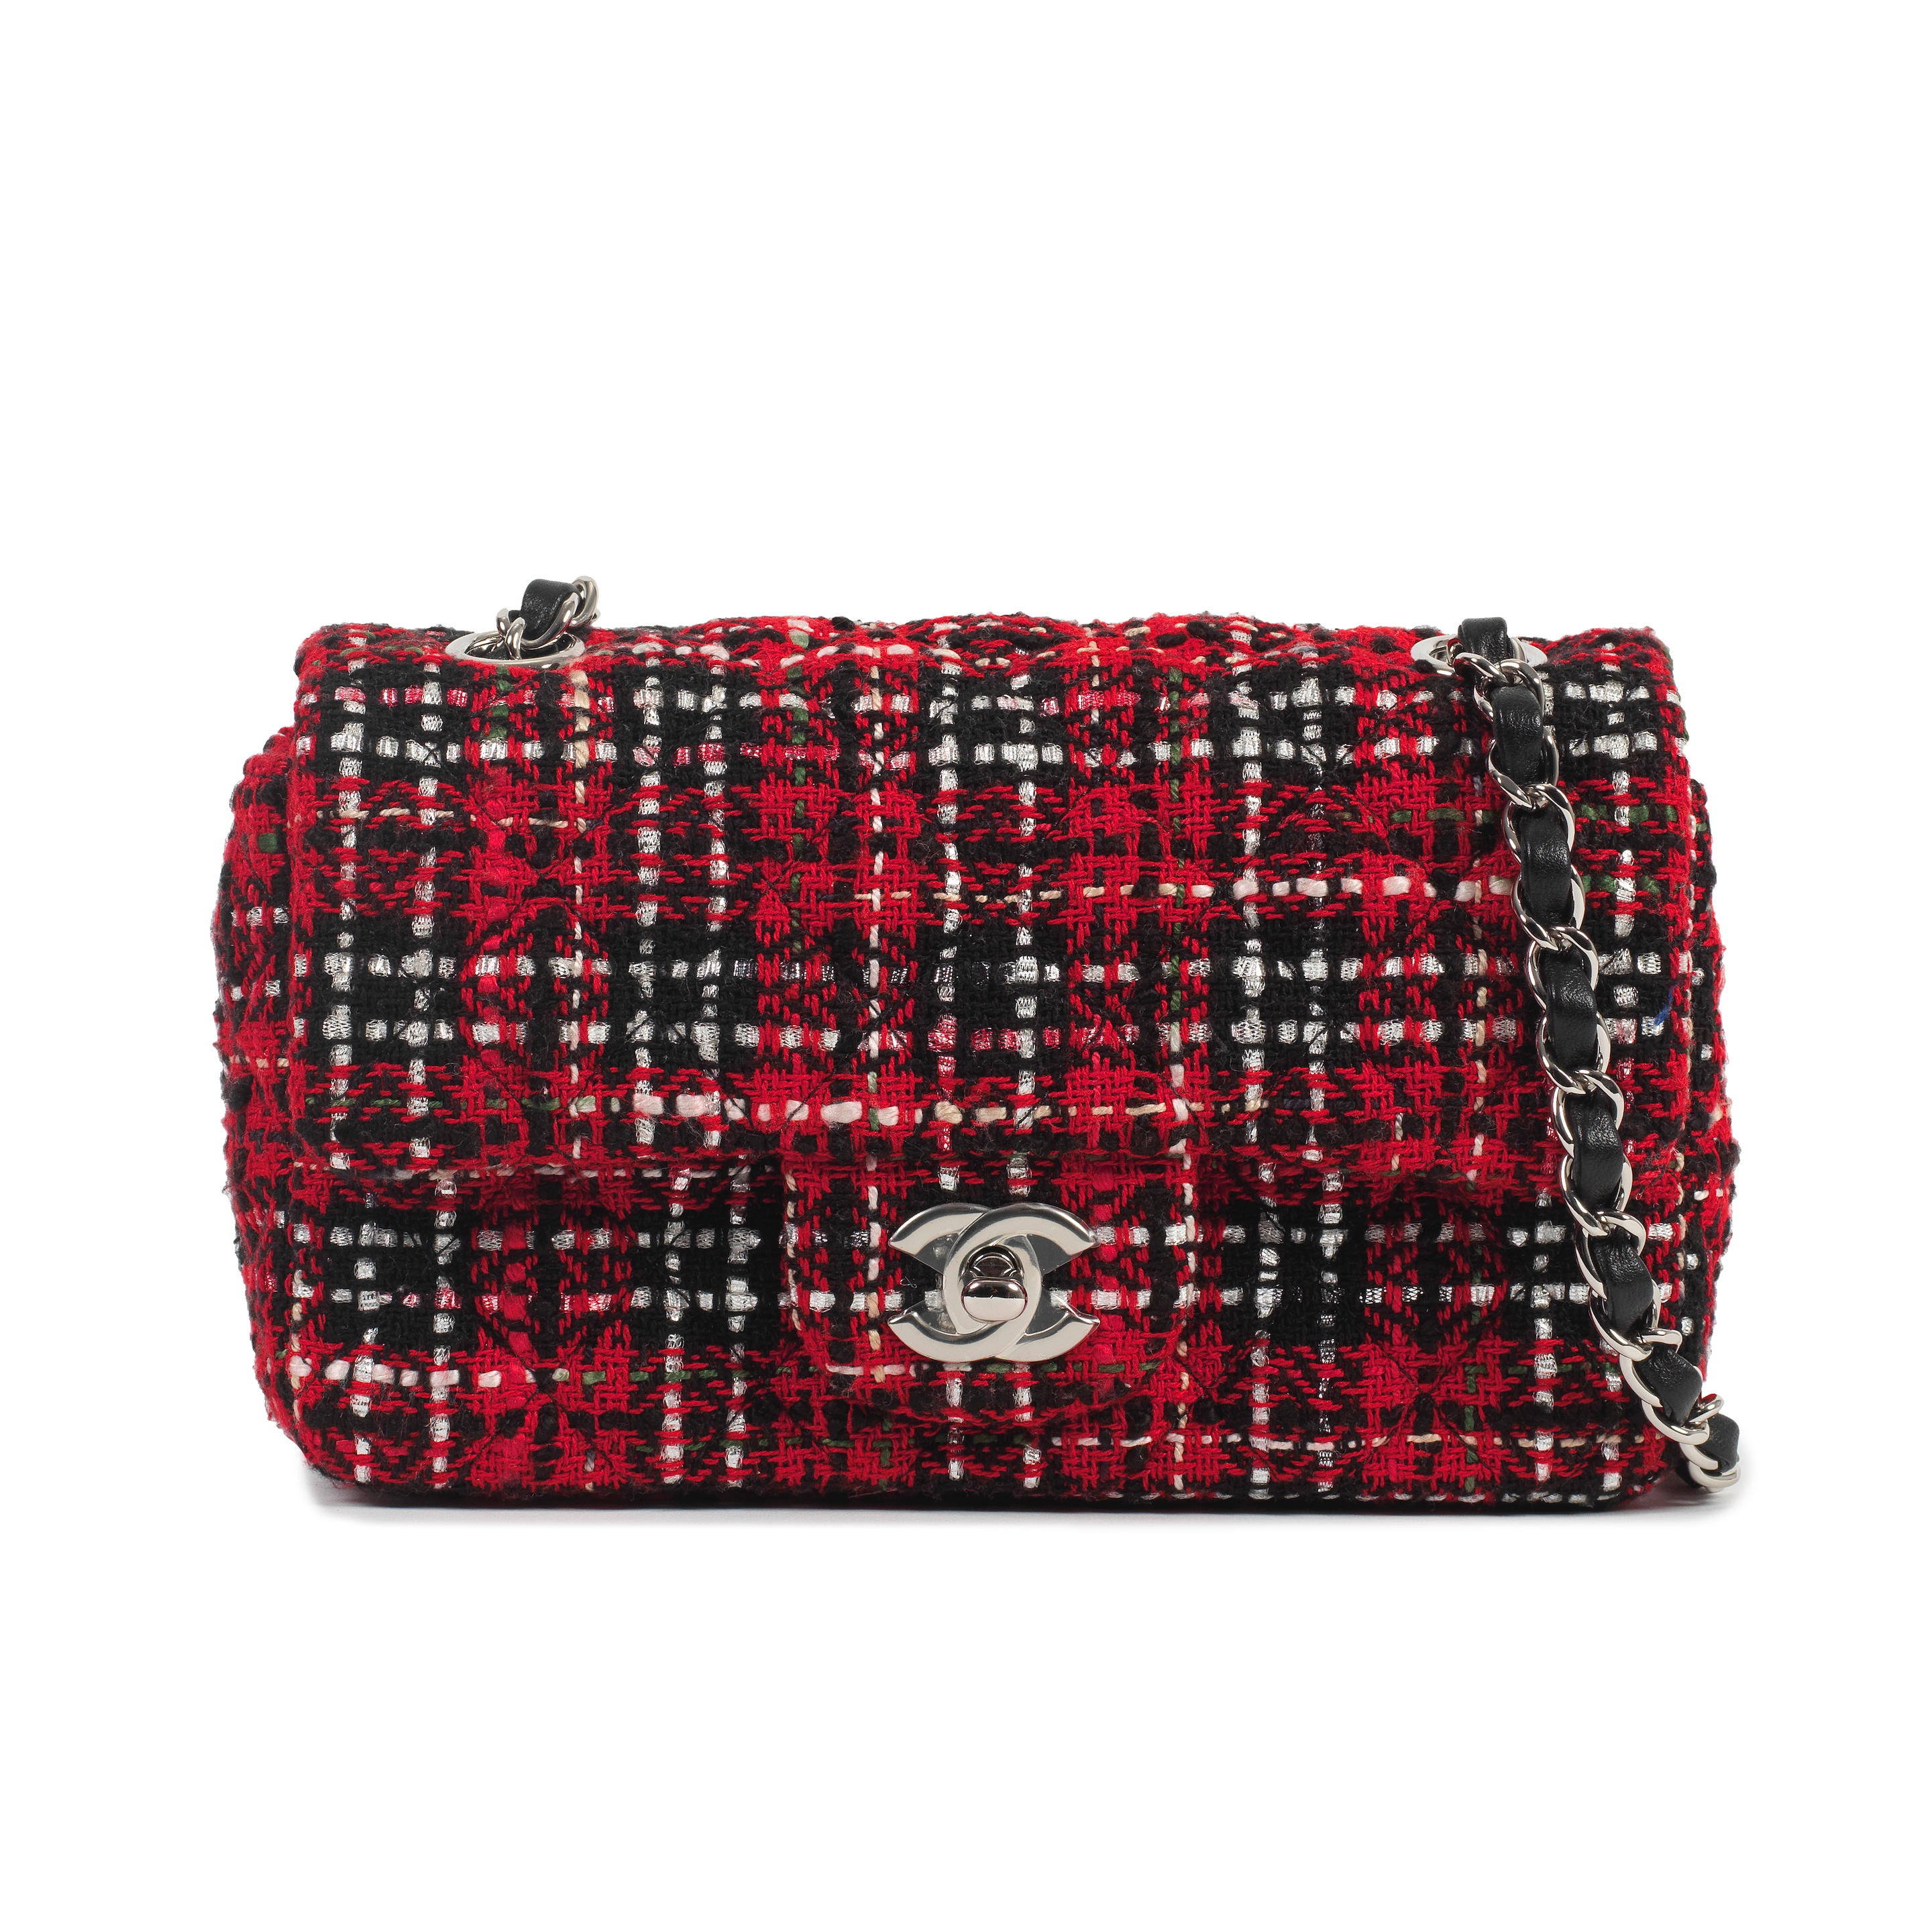 Bonhams : Virginie Viard for Chanel a Red, Blue and White Tweed